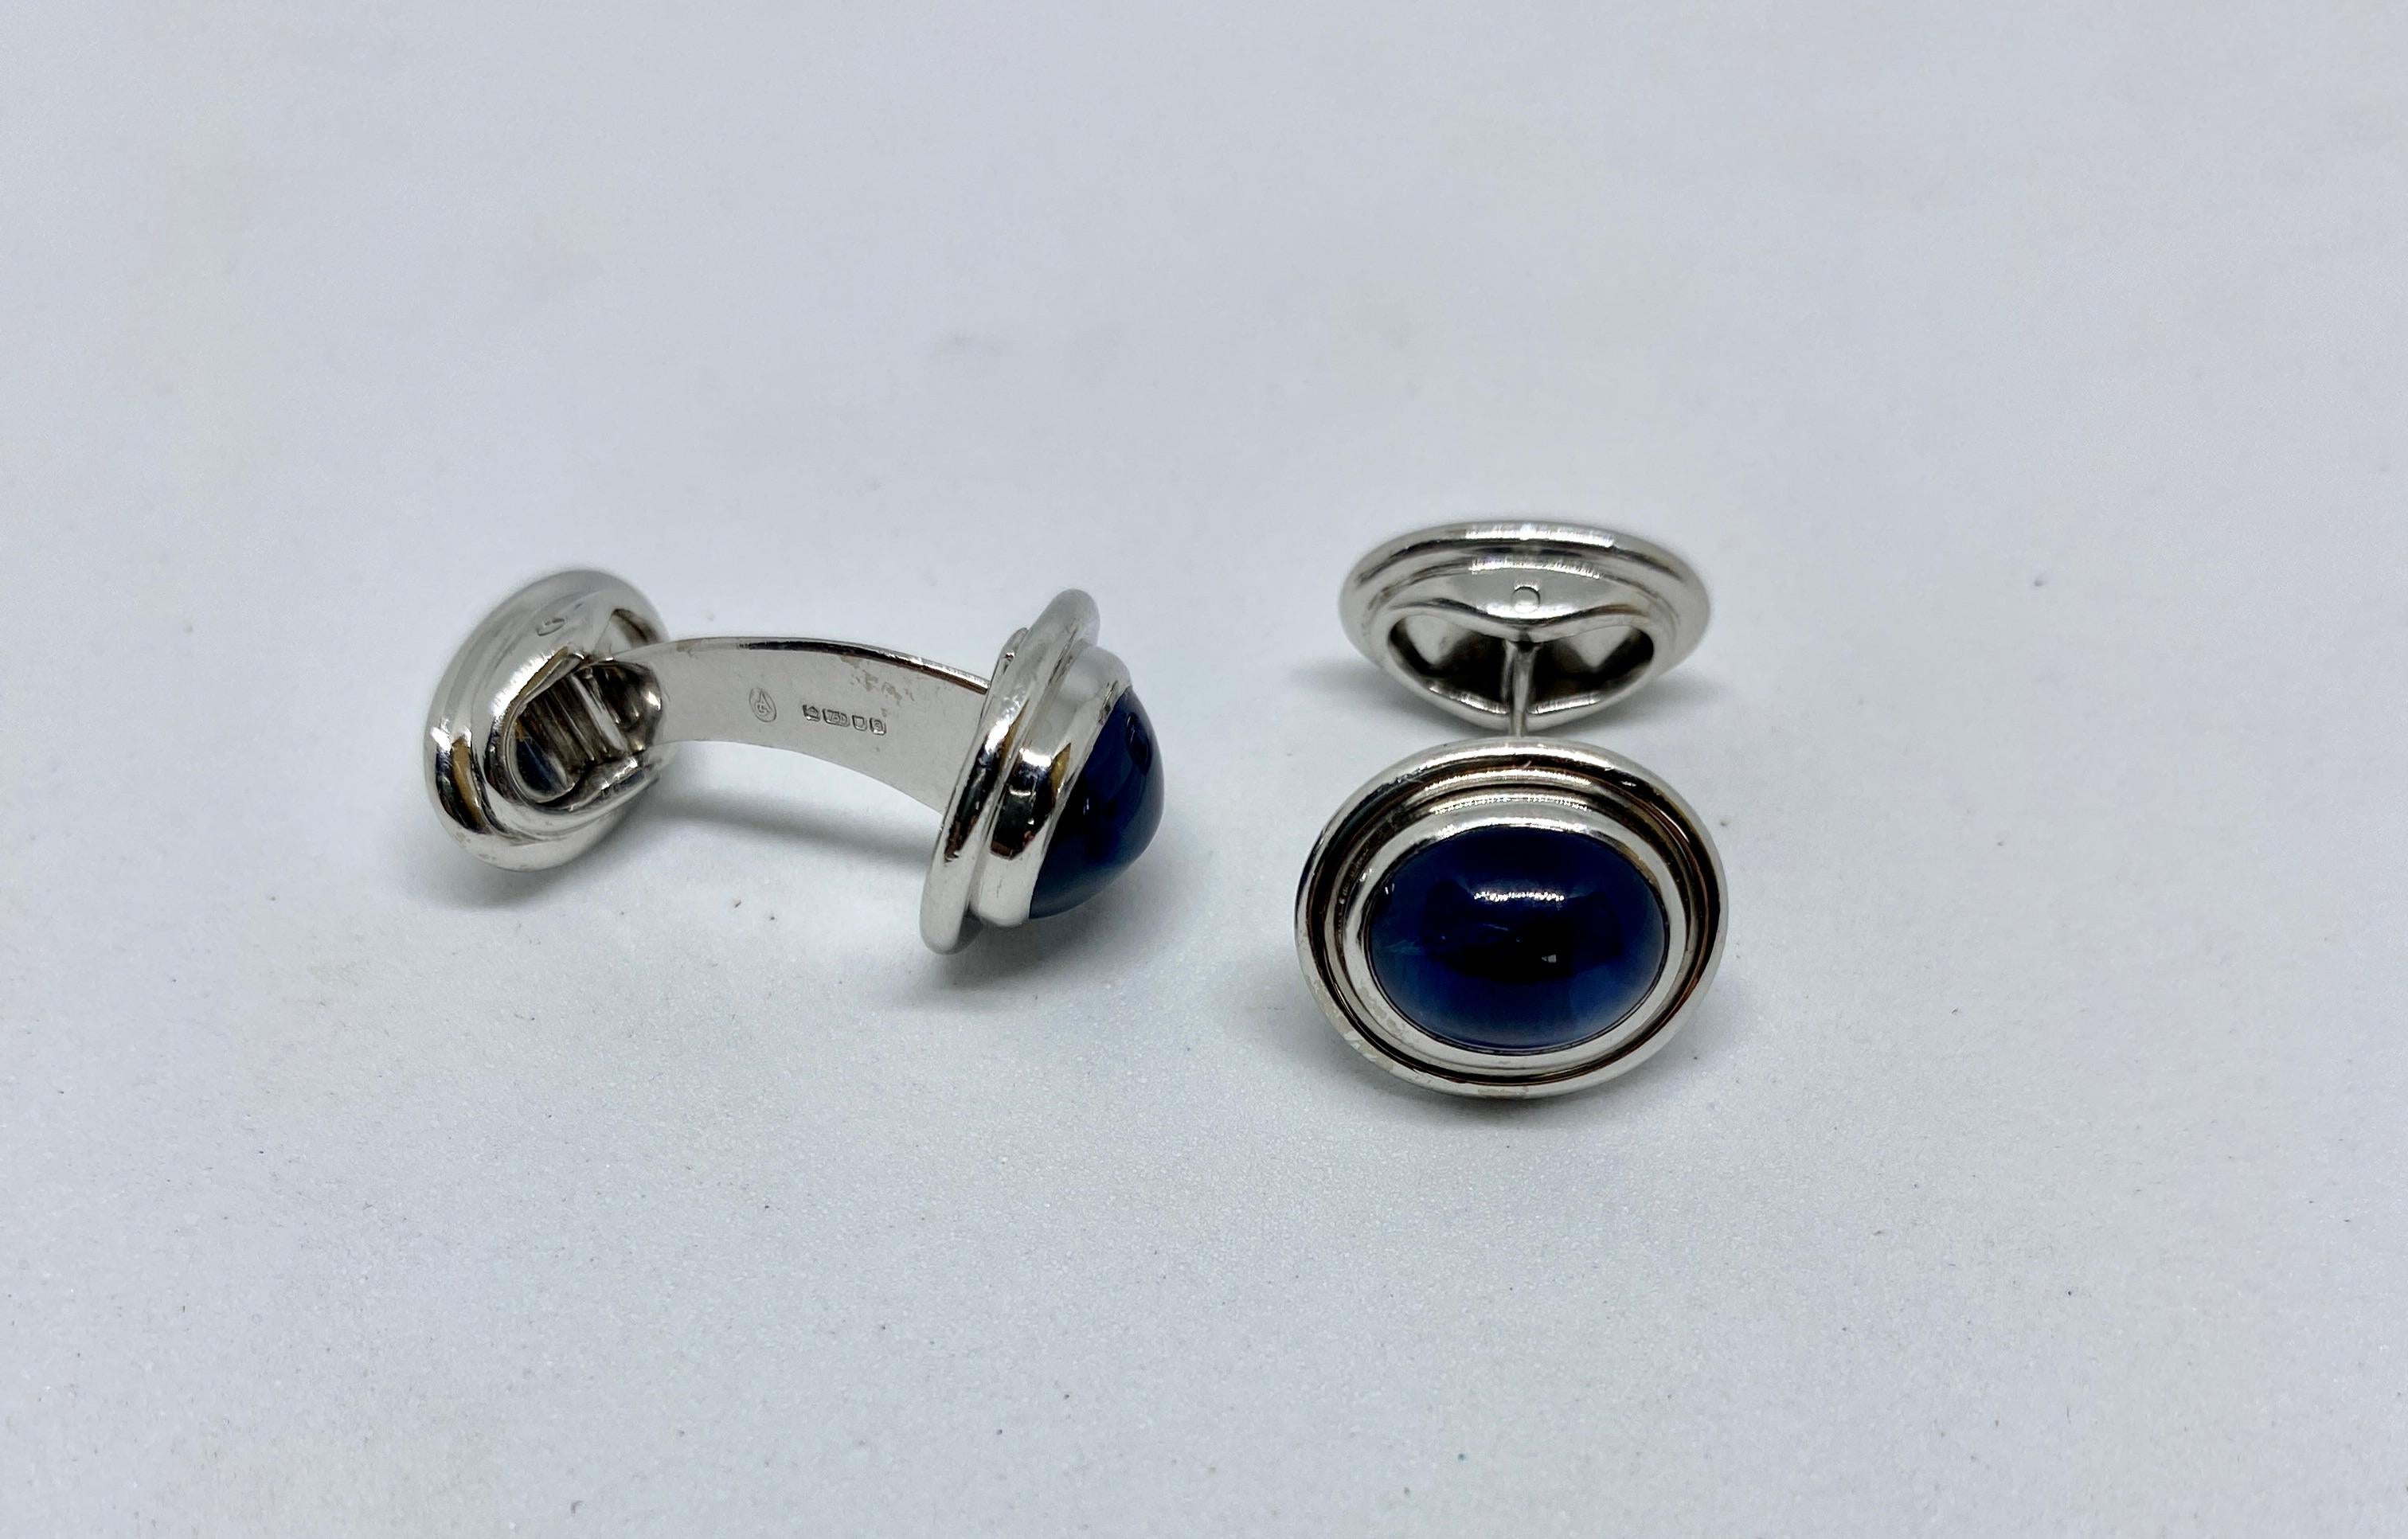 Elegant, tasteful, classic cufflinks in 18K white gold featuring luminous blue oval sapphires and oval-shaped, hinged backs. Retailed by Asprey London, they bear marks for crown jewellers Asprey & Garrard, the London Assay Office, 750 indicating